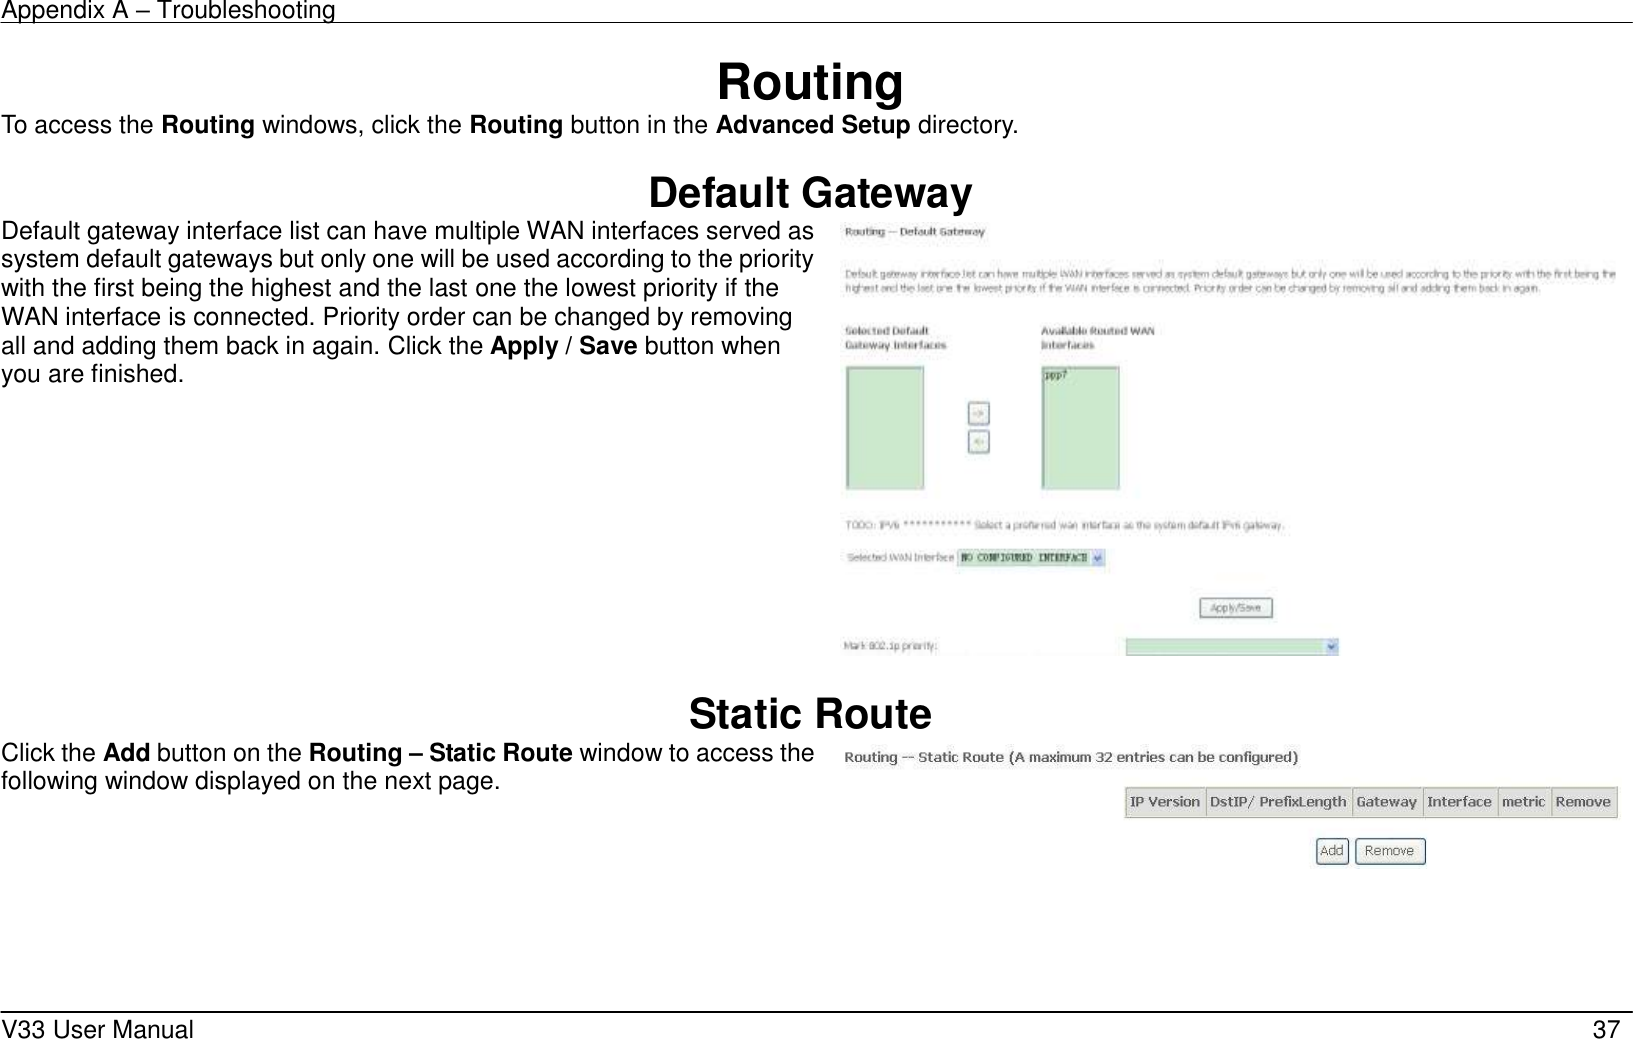 Appendix A – Troubleshooting    V33 User Manual   37 Routing To access the Routing windows, click the Routing button in the Advanced Setup directory.  Default Gateway Default gateway interface list can have multiple WAN interfaces served as system default gateways but only one will be used according to the priority with the first being the highest and the last one the lowest priority if the WAN interface is connected. Priority order can be changed by removing all and adding them back in again. Click the Apply / Save button when you are finished.     Static Route Click the Add button on the Routing – Static Route window to access the following window displayed on the next page.     